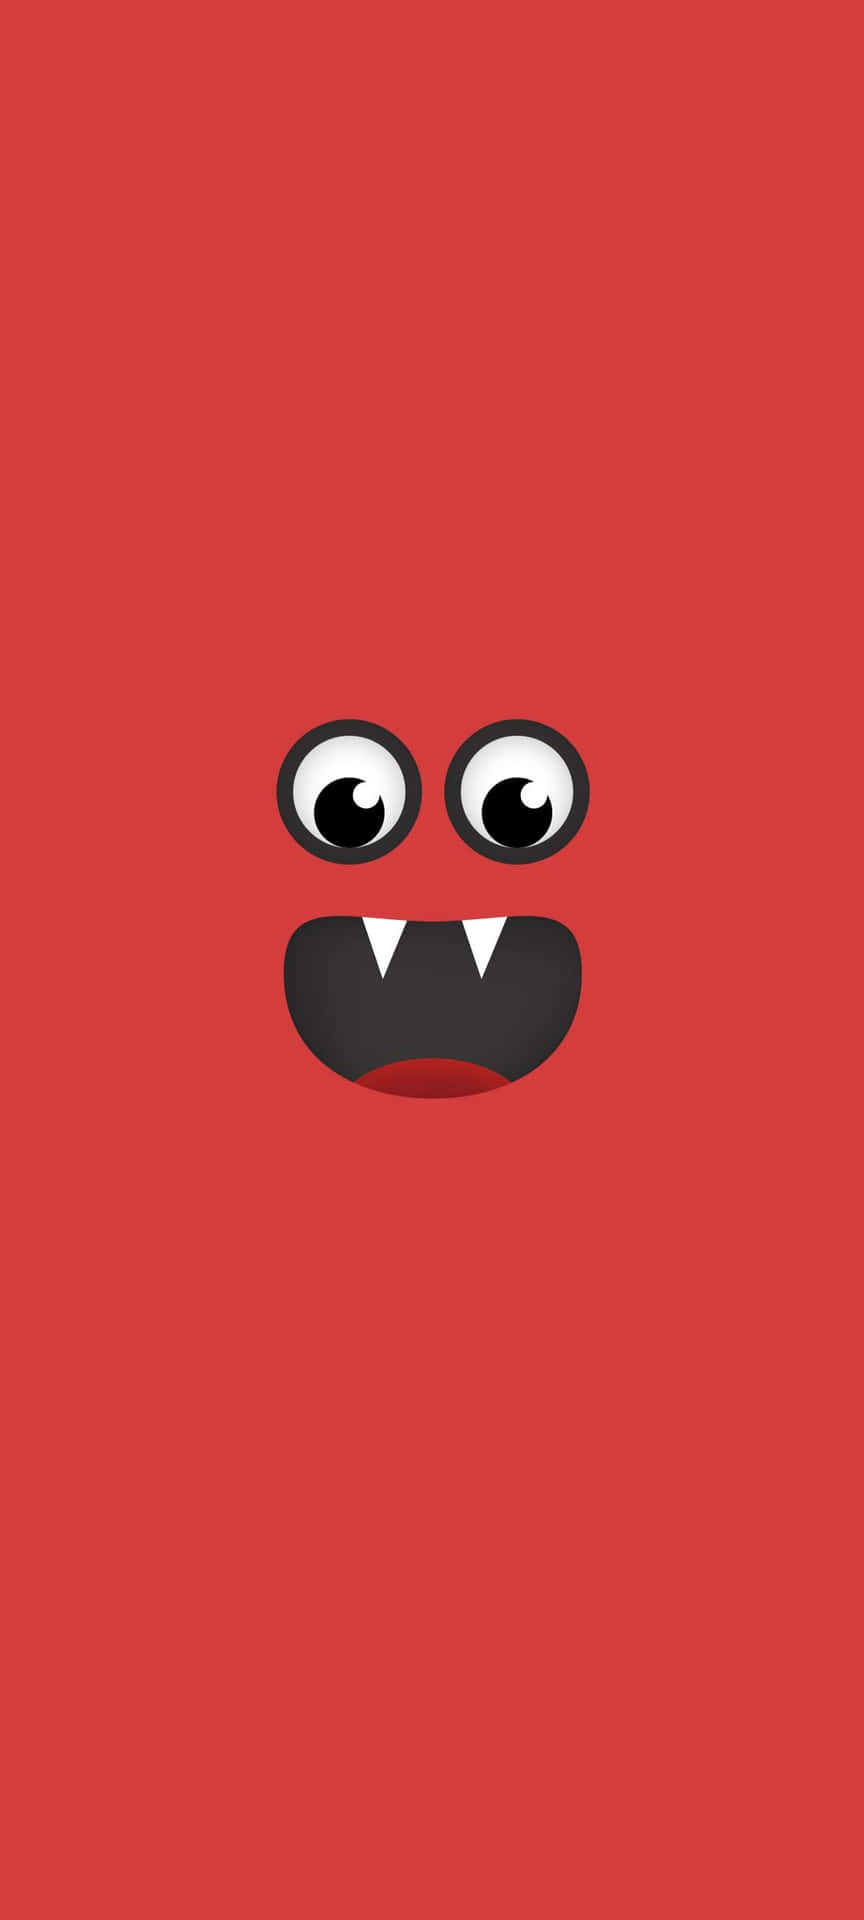 Free Cute Red Wallpaper Downloads, [100+] Cute Red Wallpapers for FREE |  